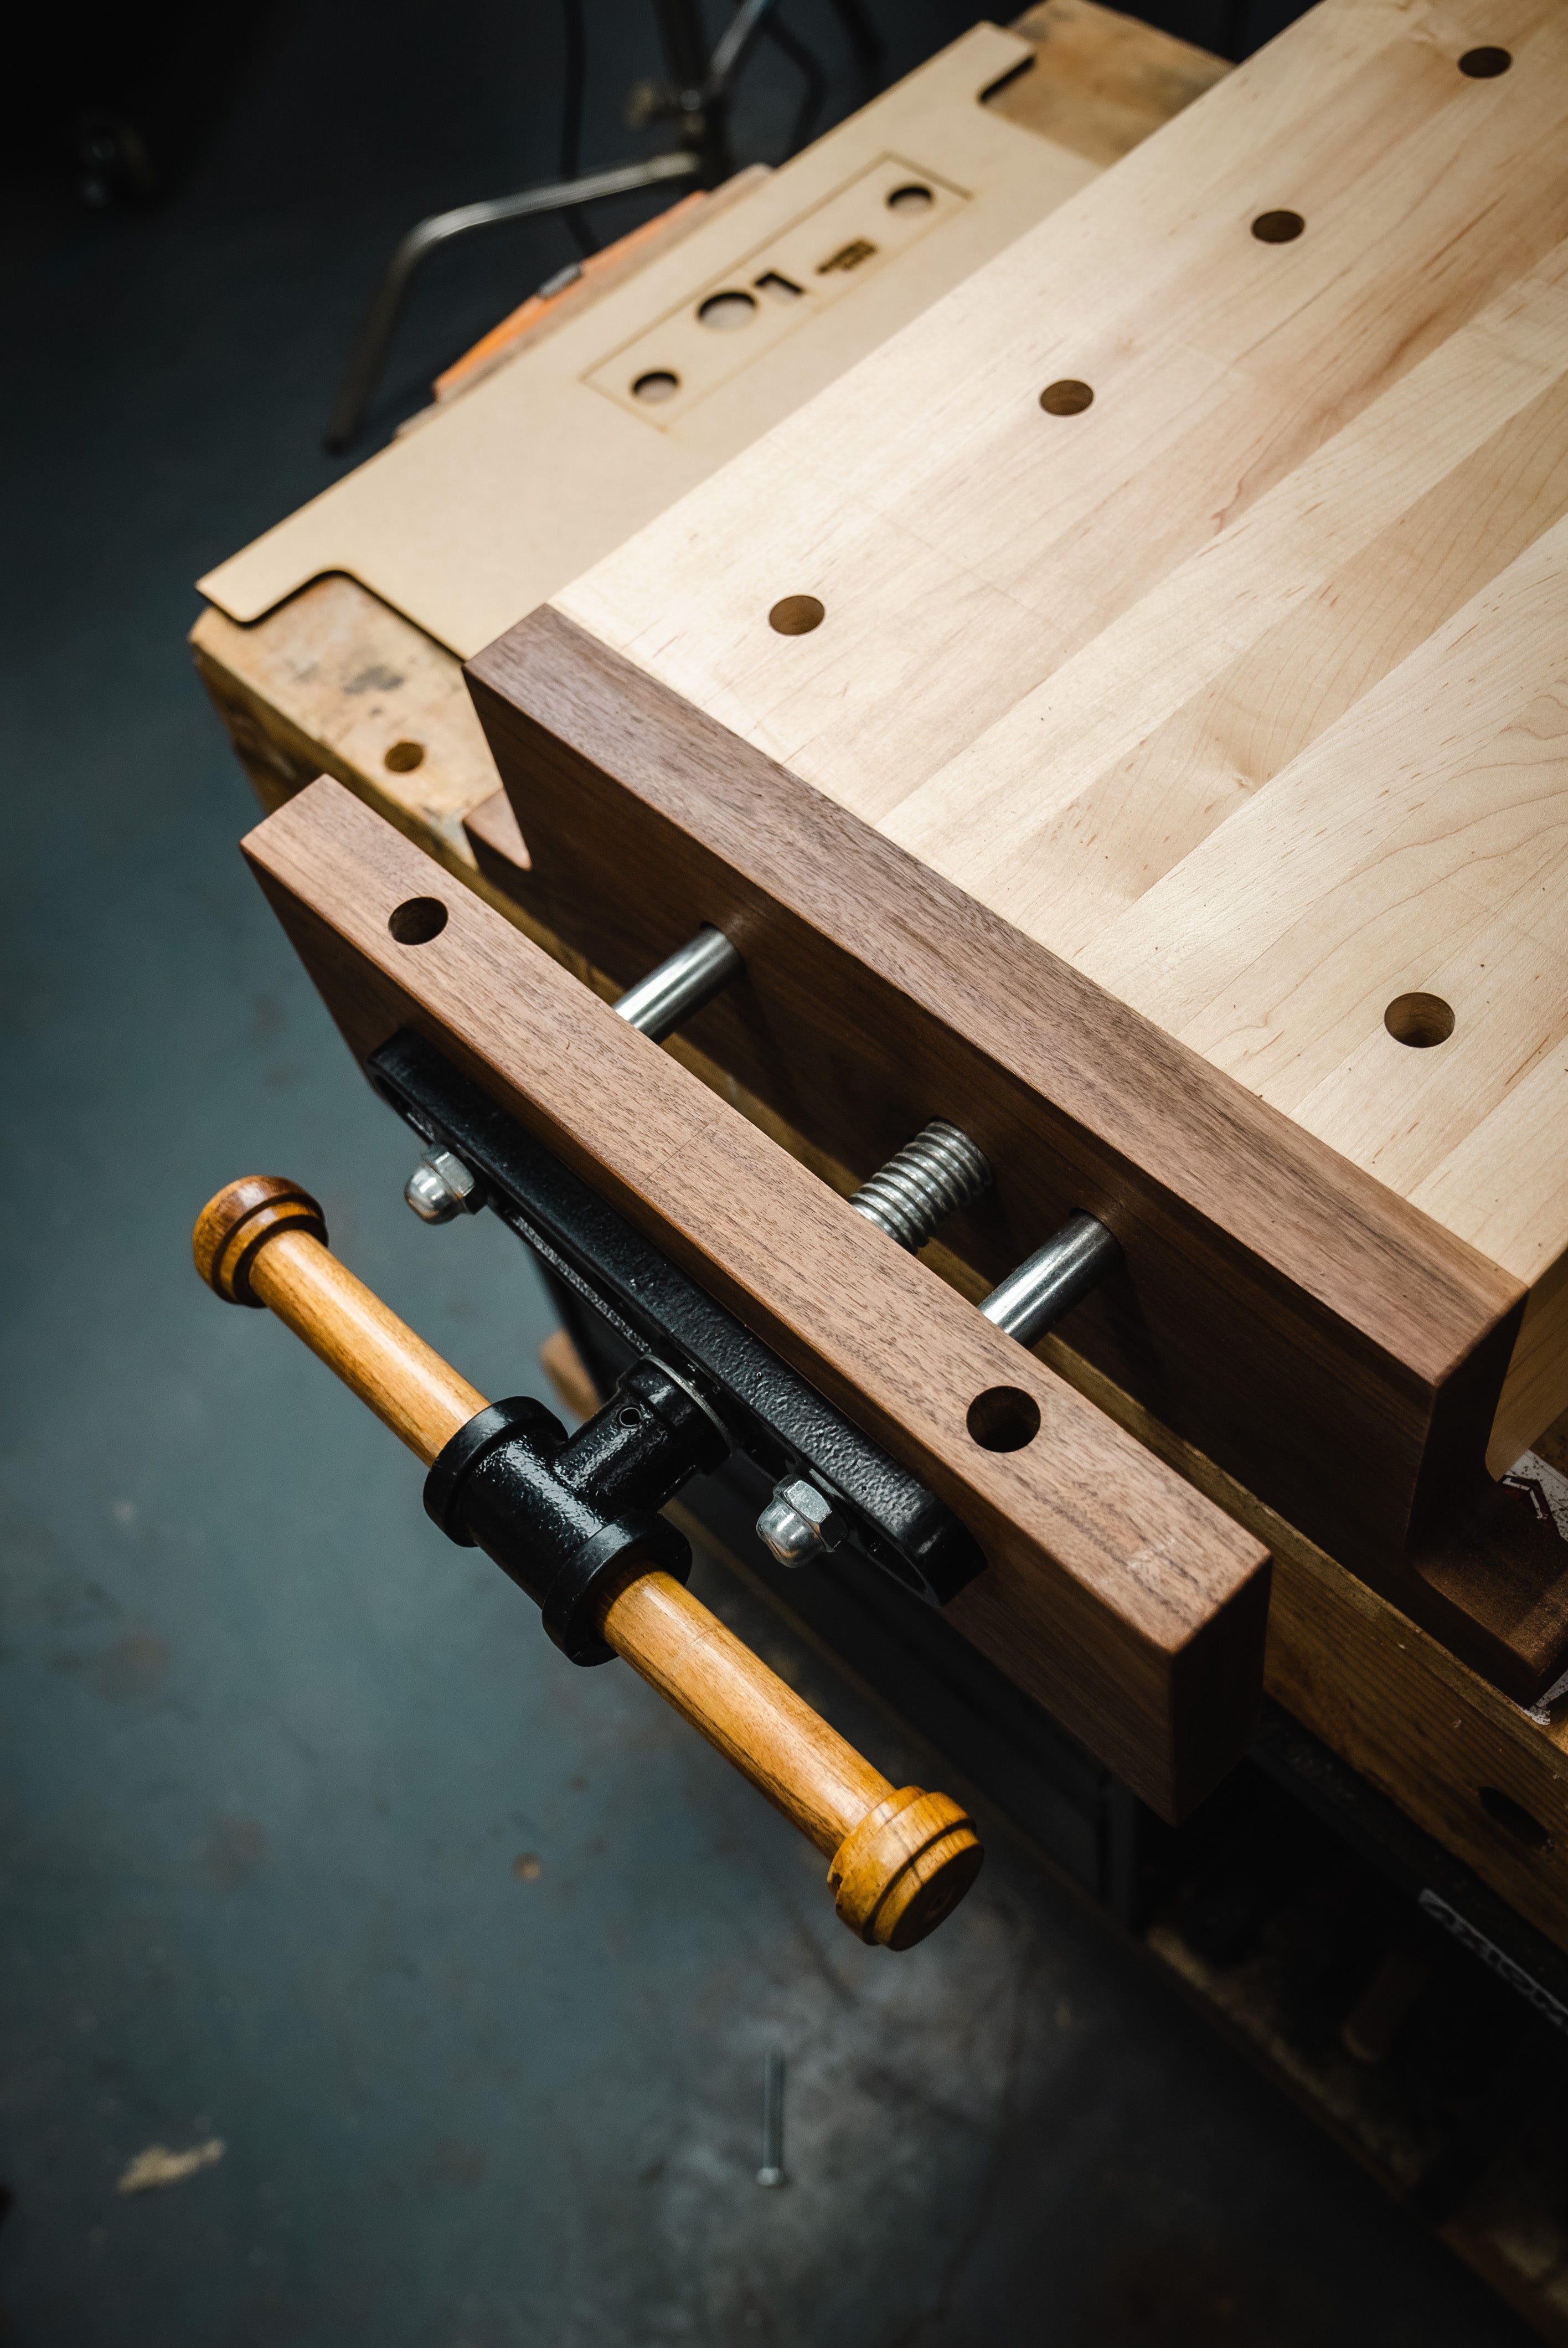 planer stand – One Minute Workbench